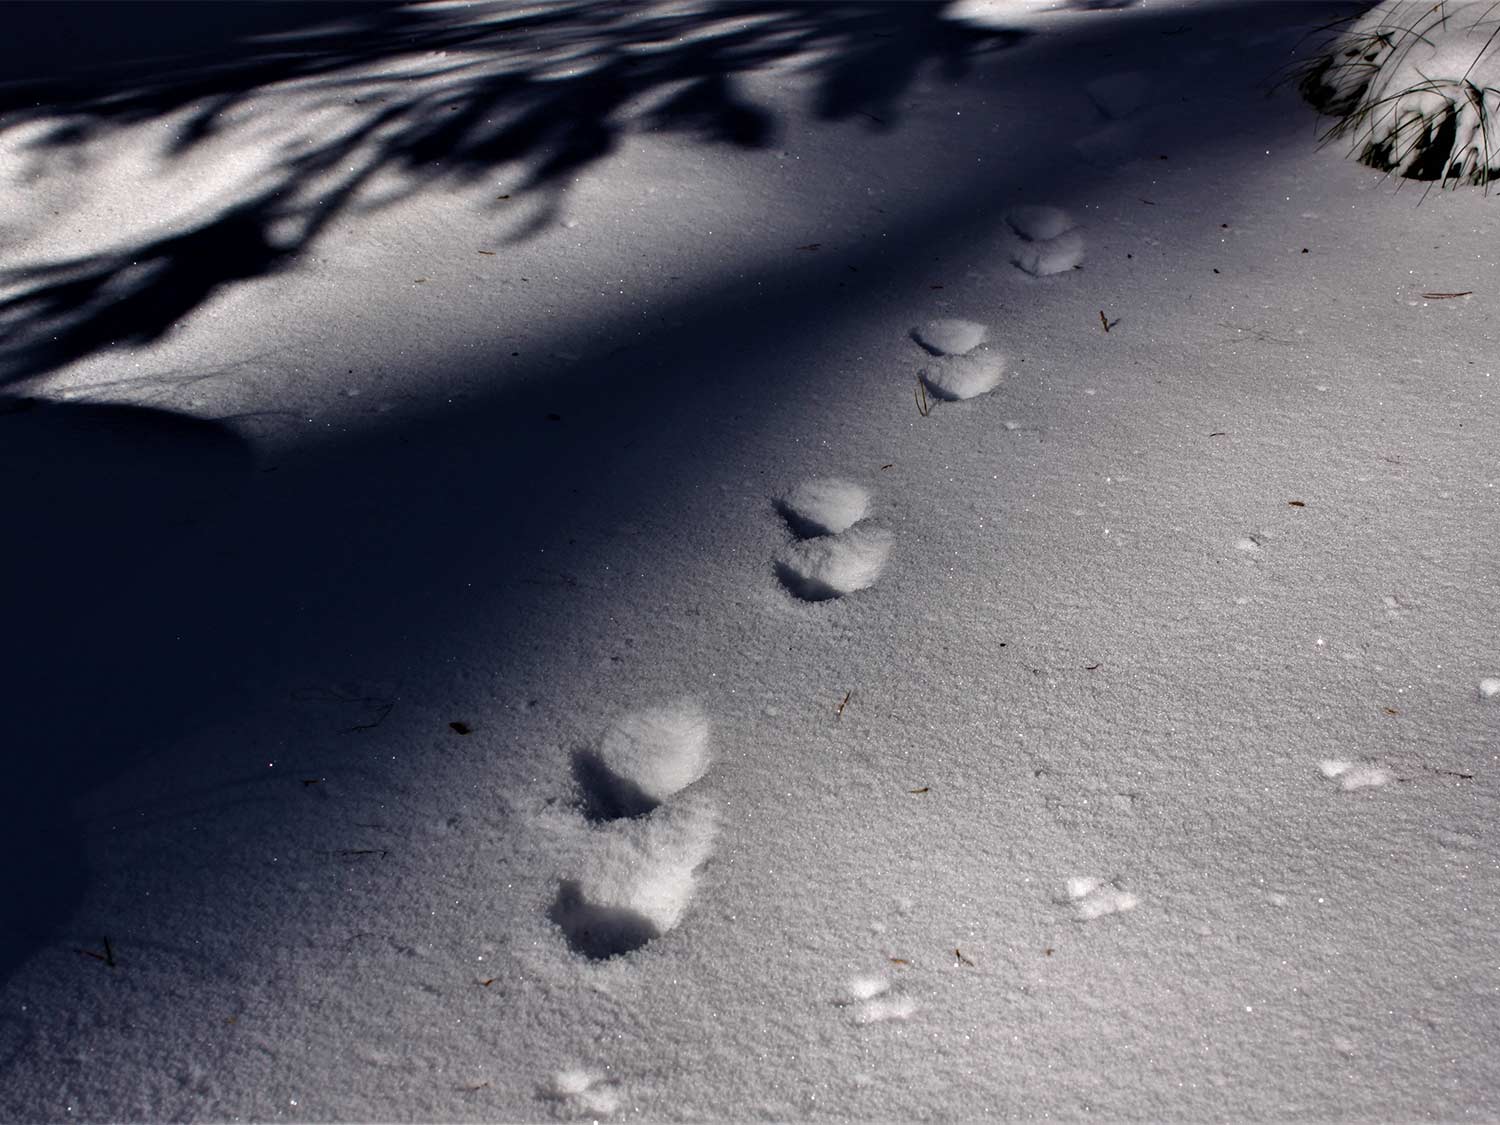 A hunters footprints in the snow next to tracks from a marten.